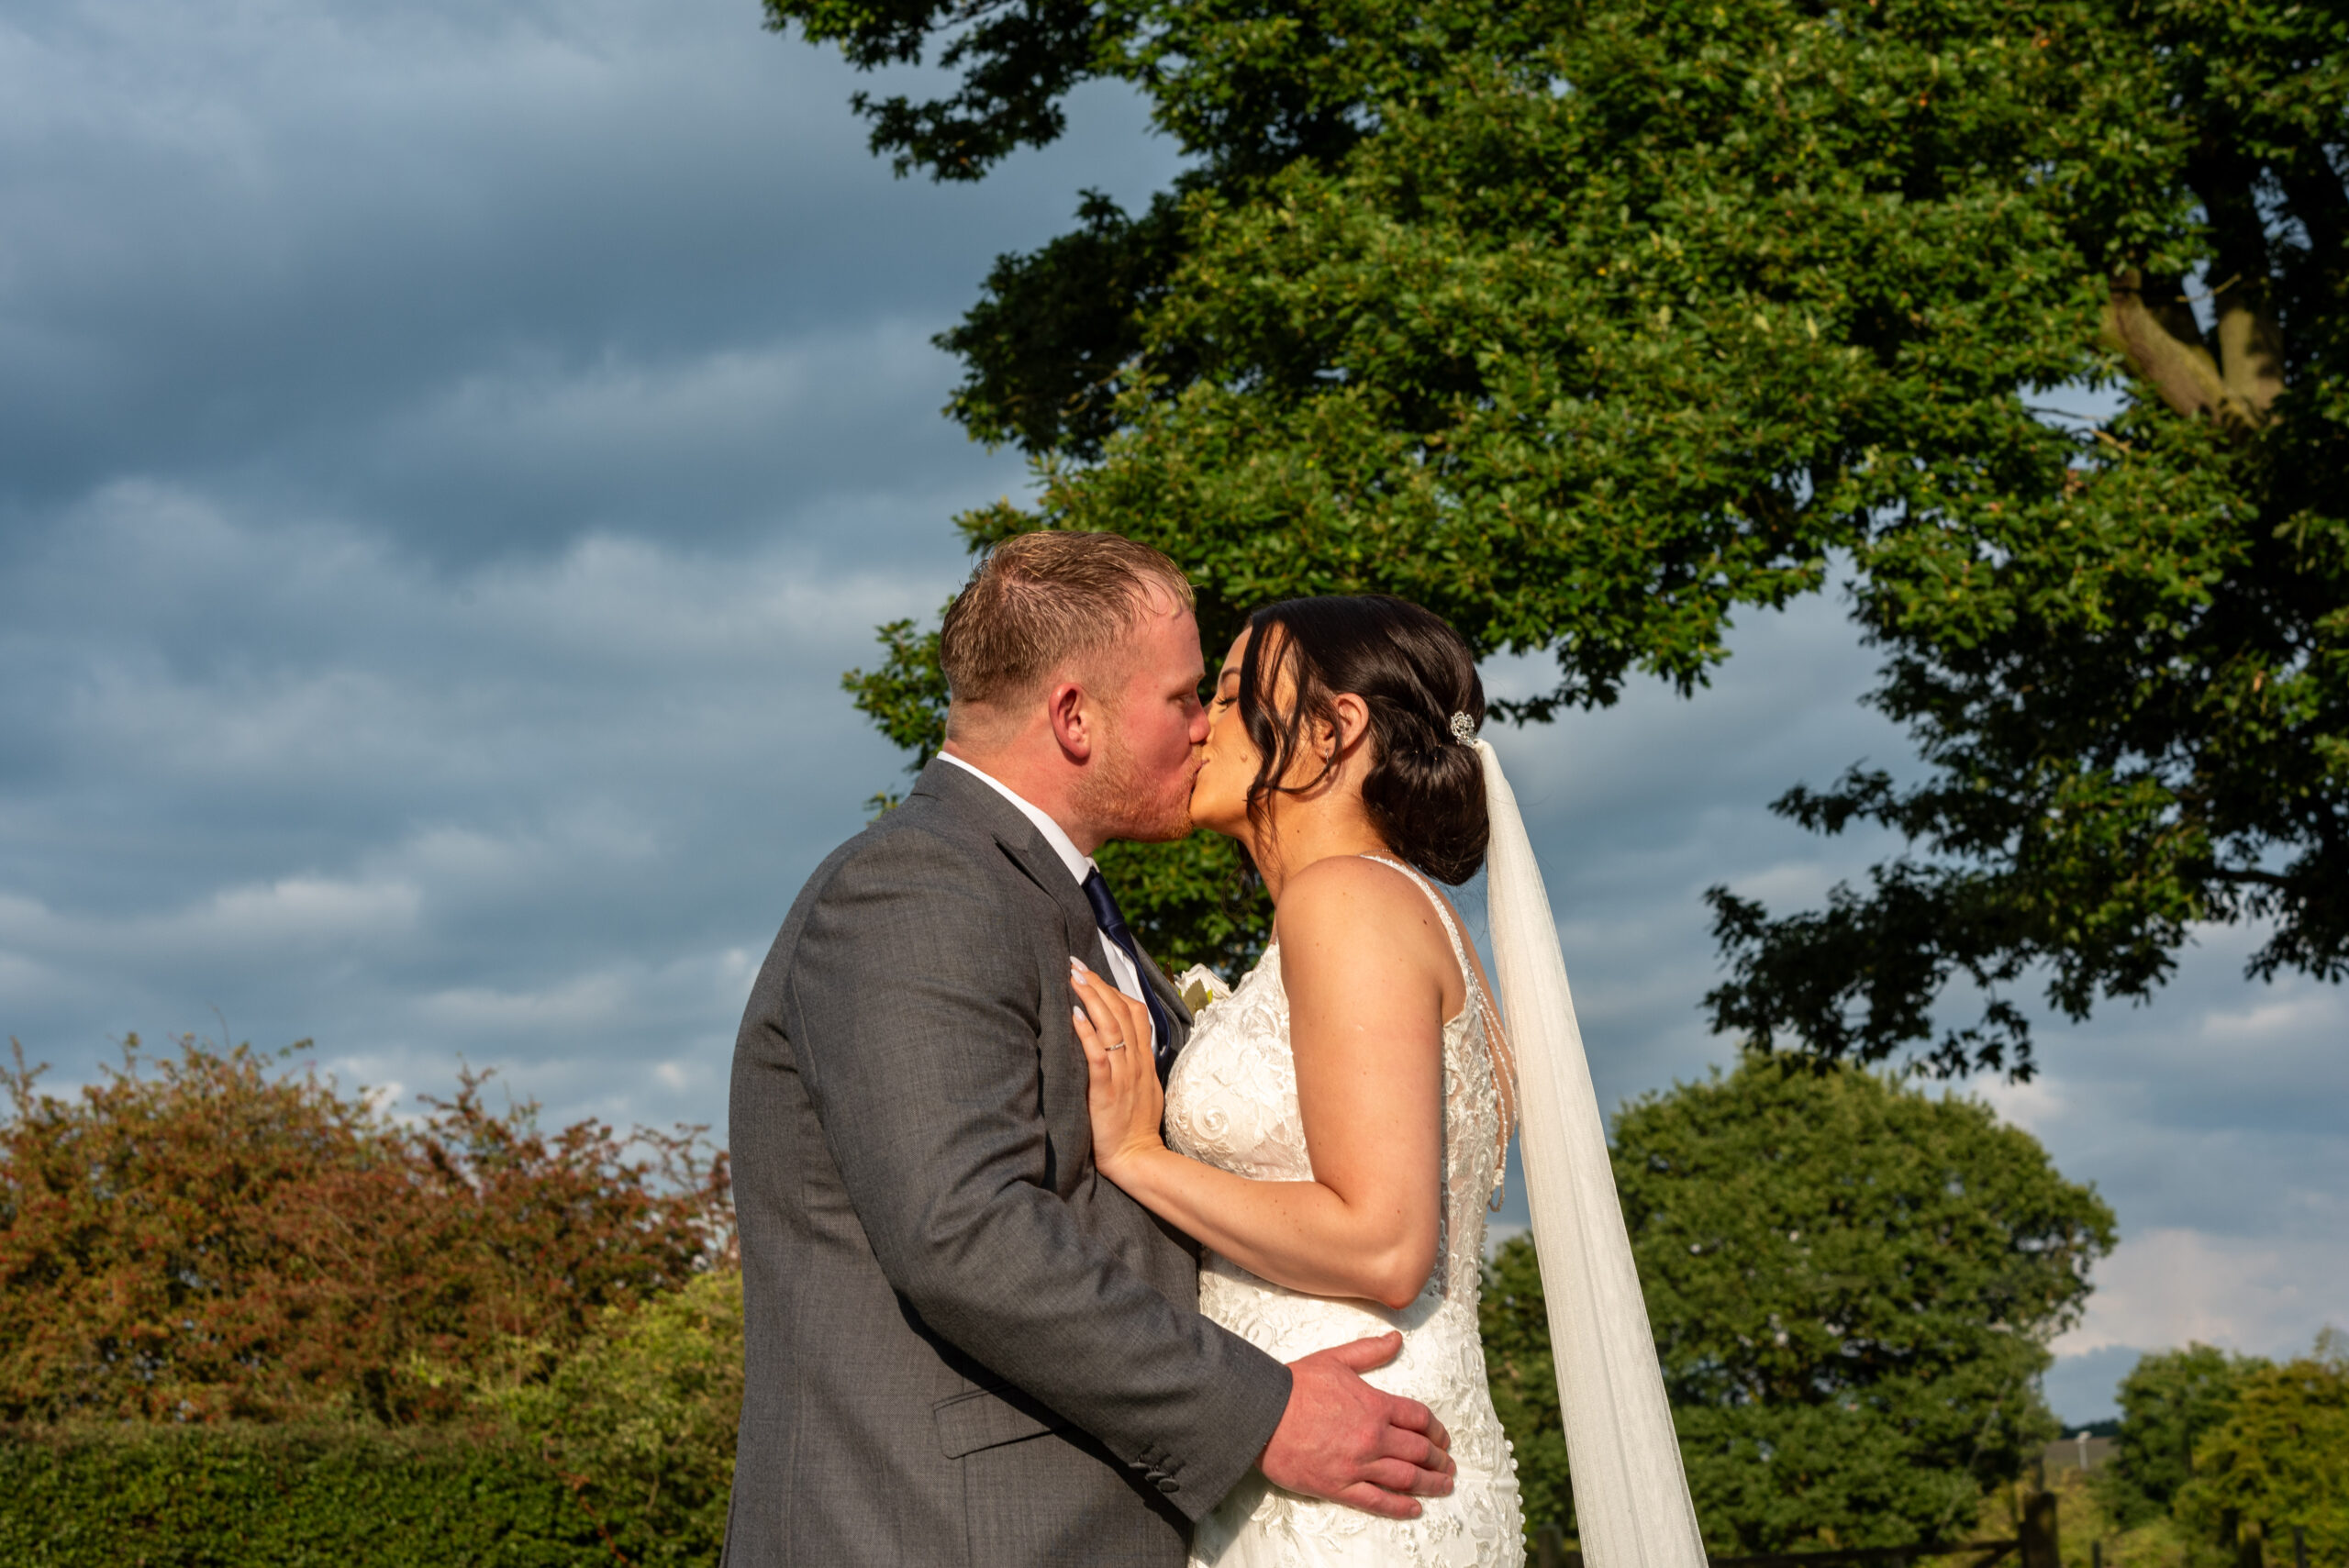 Newly-wed couples portrait in the summer sun at Oak Farm Hotel in Cannock